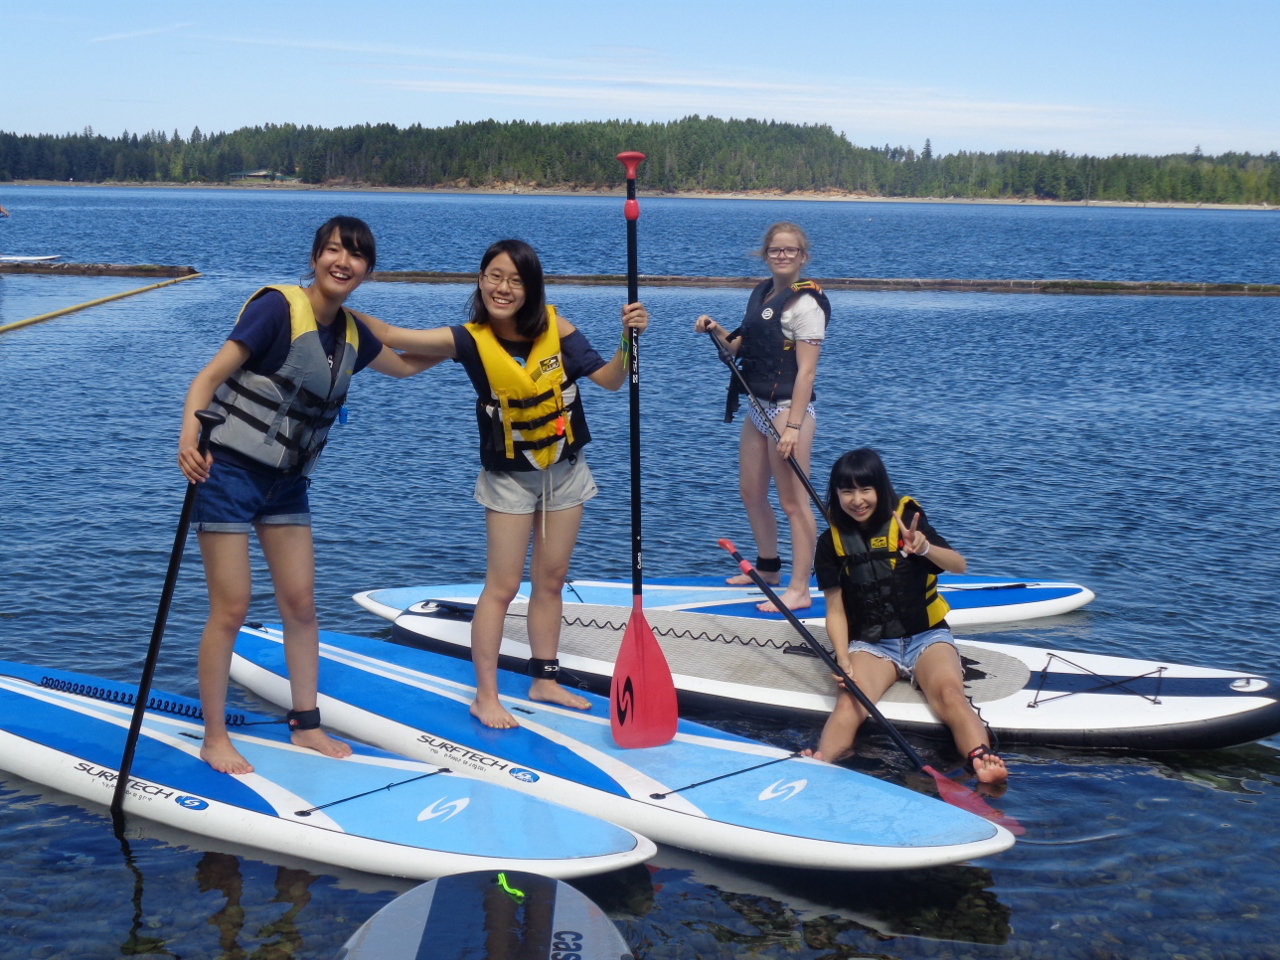 Students on paddle boards on water